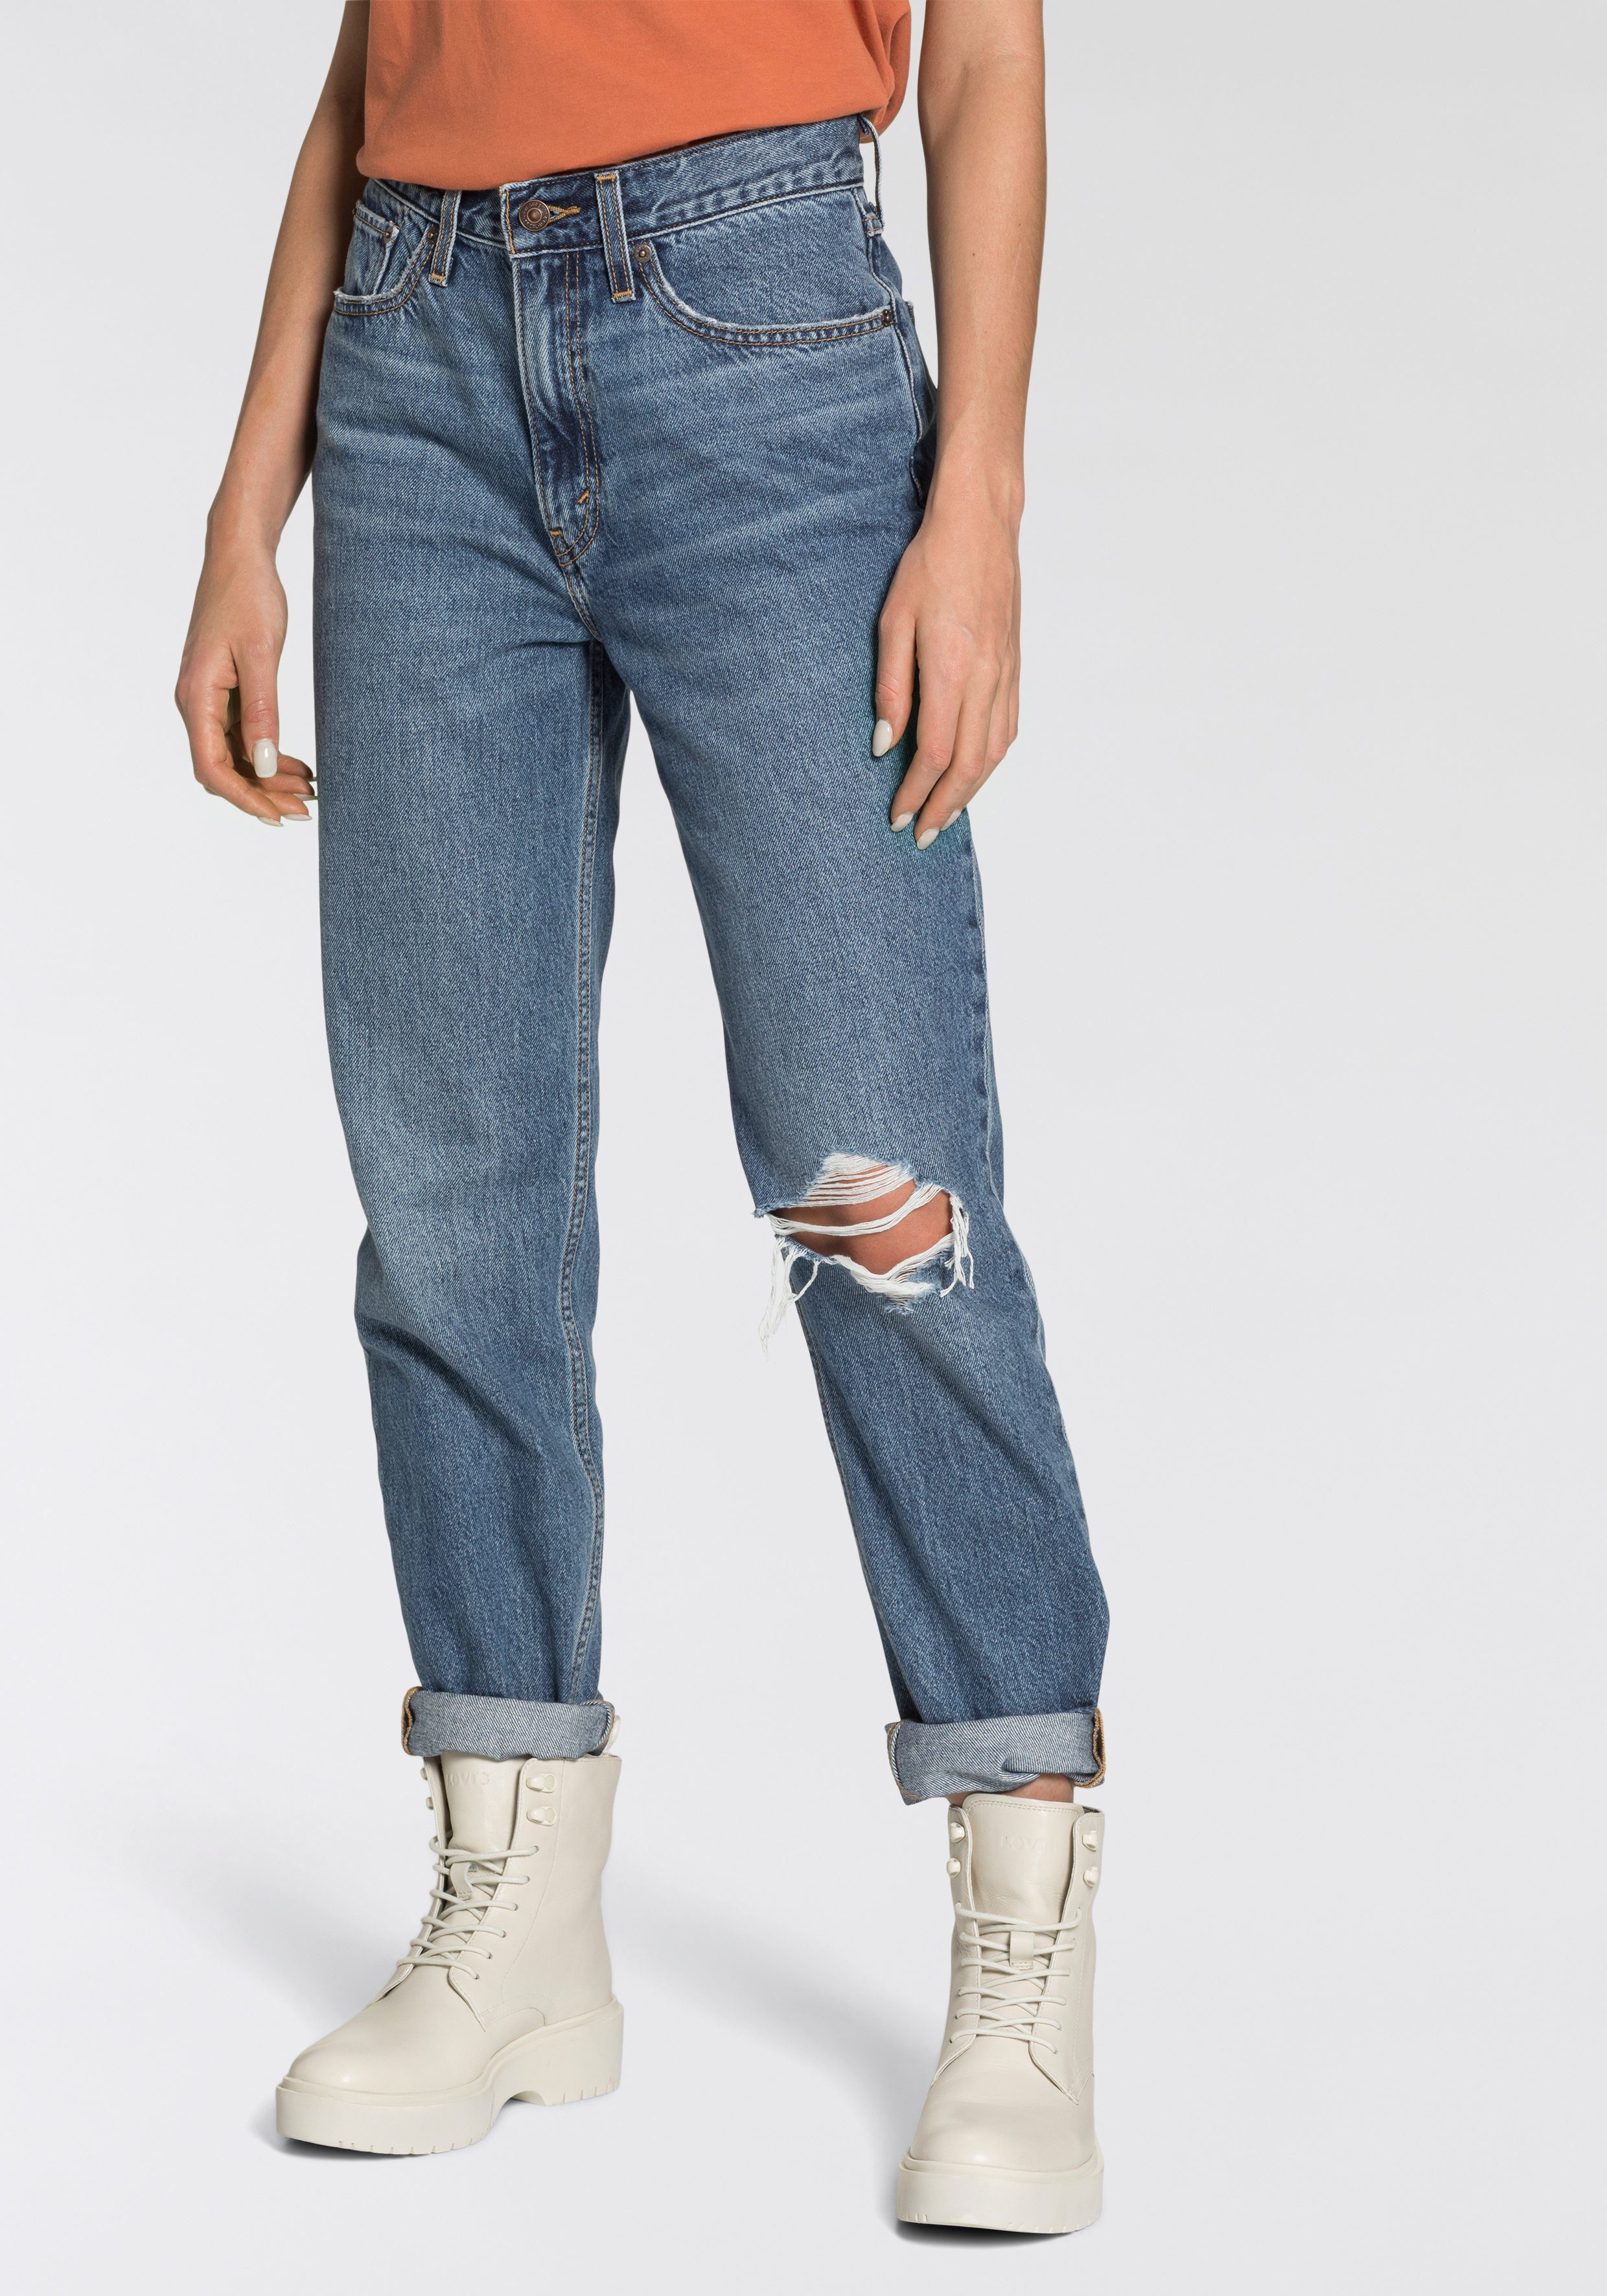 MOM 80S JEANS Levi's® denim Mom-Jeans mid-blue